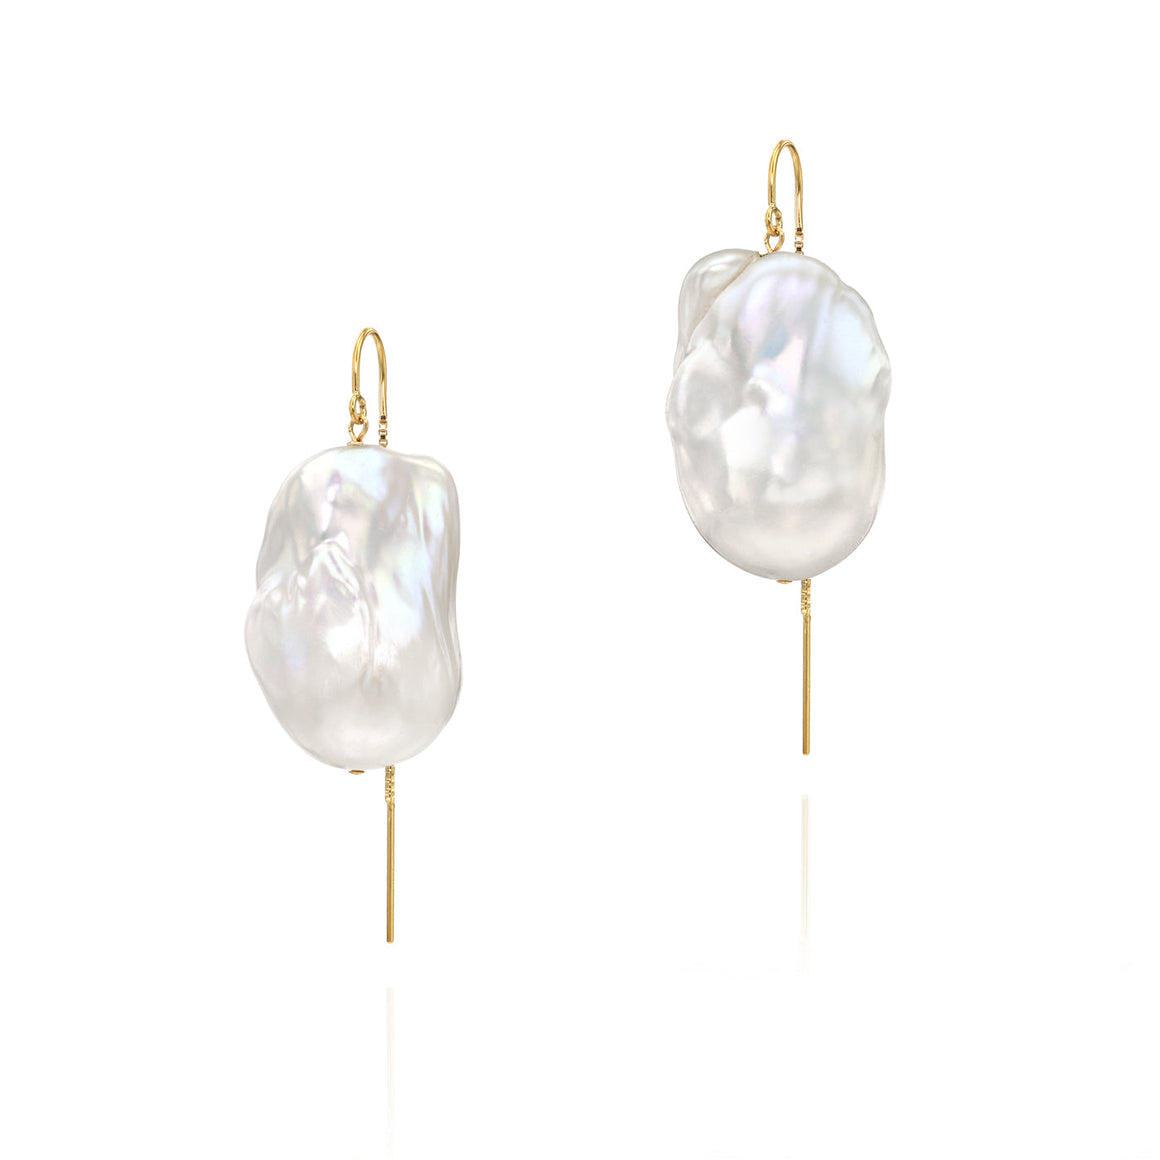 XXL Runway Size White Baroque Freshwater Pearl Drop Threader Earrings 14K Yellow Gold-Filled